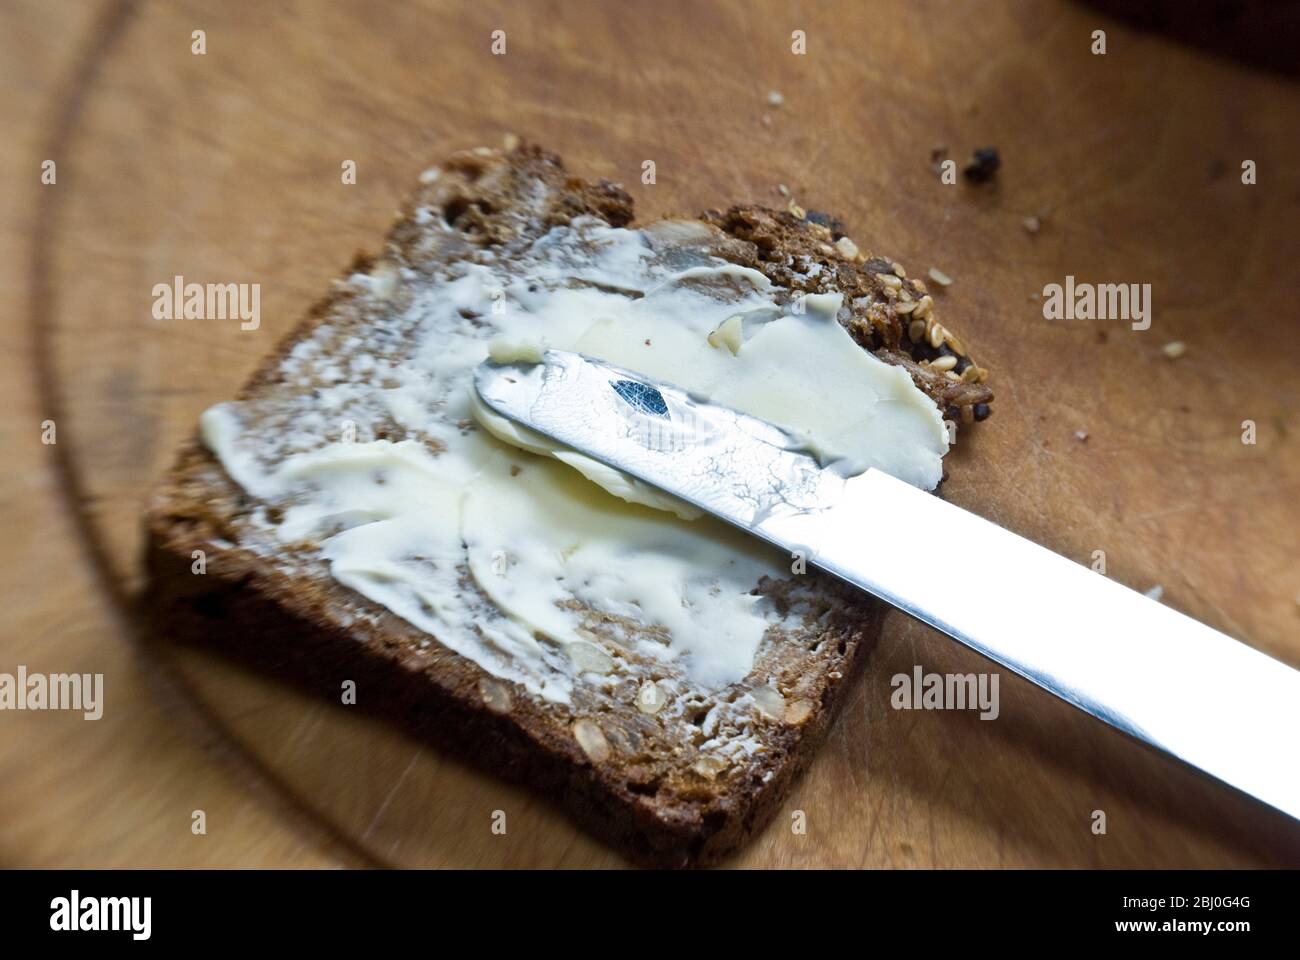 Spreading butter onto slice of Scandinavian style cparse rye bread. - Stock Photo